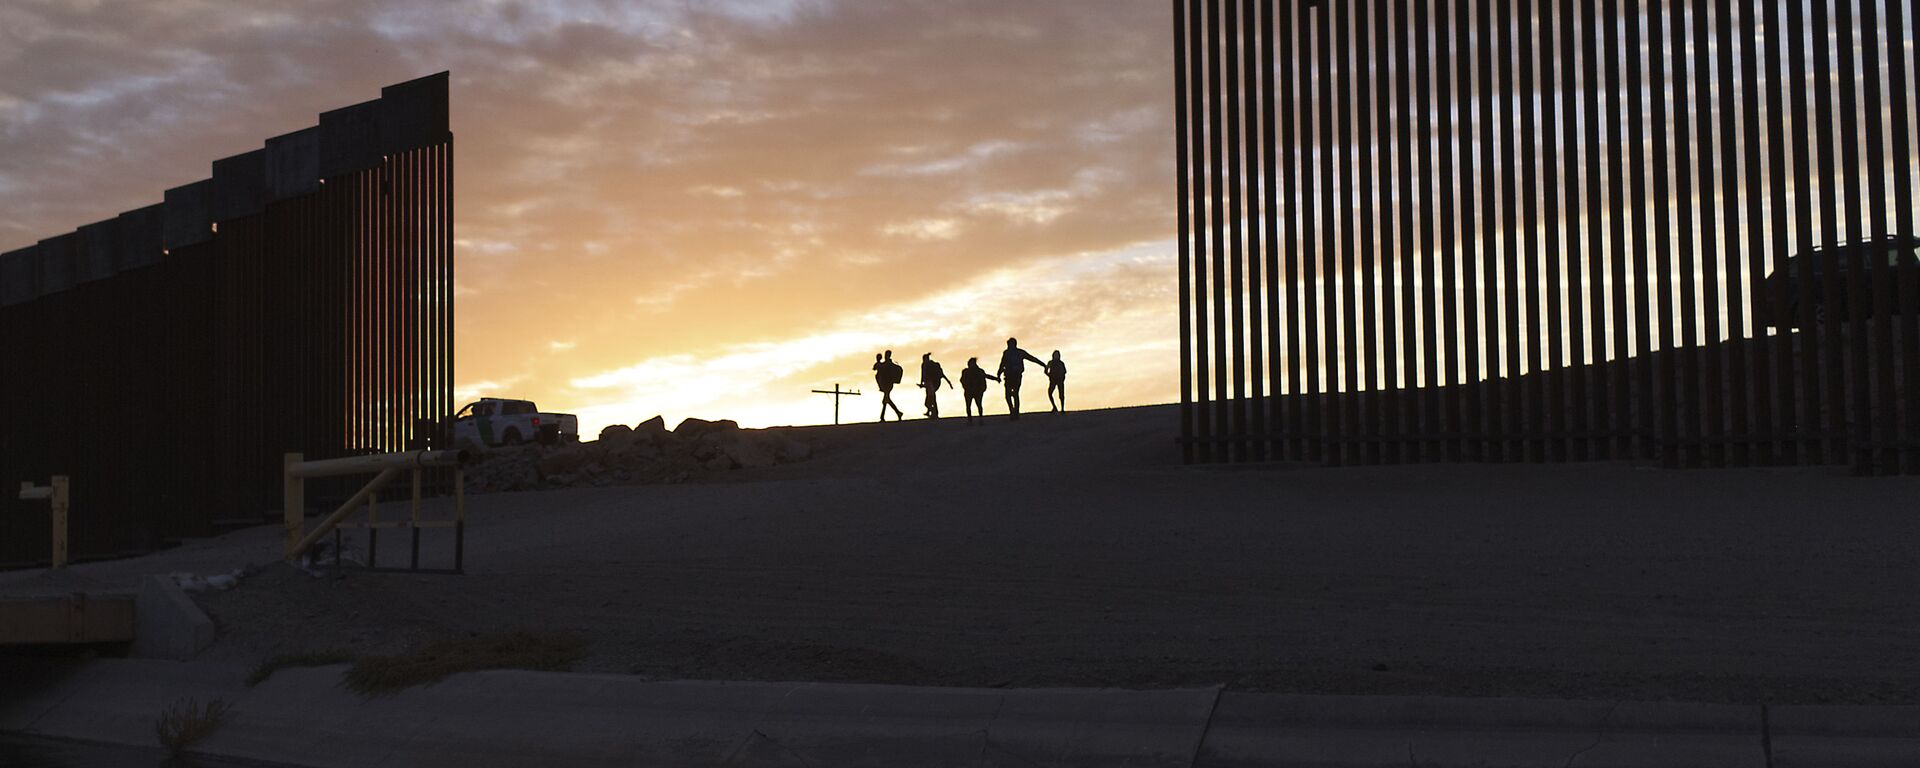 A pair of migrant families from Brazil pass through a gap in the border wall to reach the United States after crossing from Mexico in Yuma, Ariz., Thursday, June 10, 2021, to seek asylum. - Sputnik International, 1920, 12.06.2021